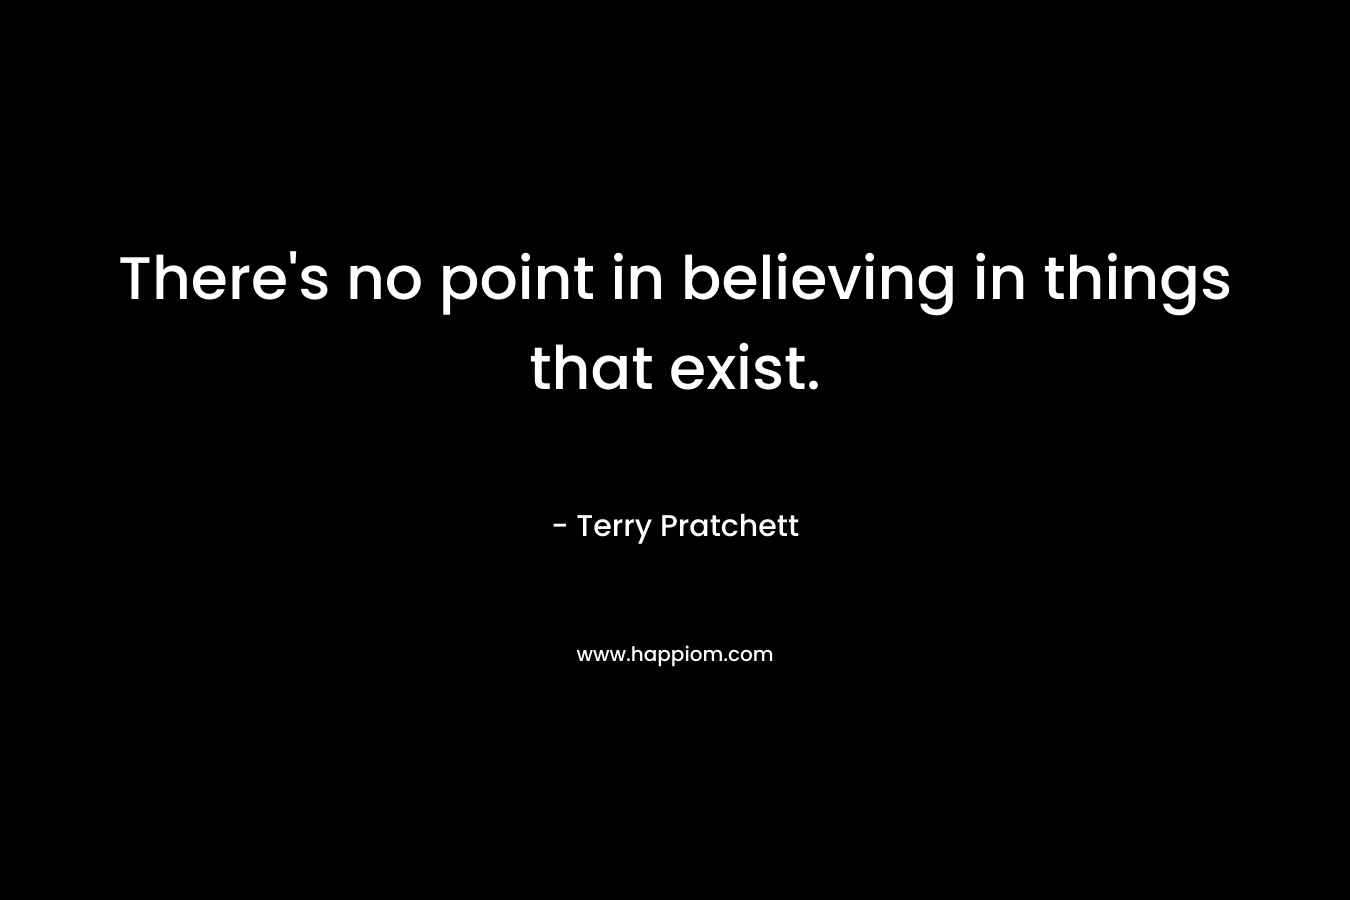 There's no point in believing in things that exist.